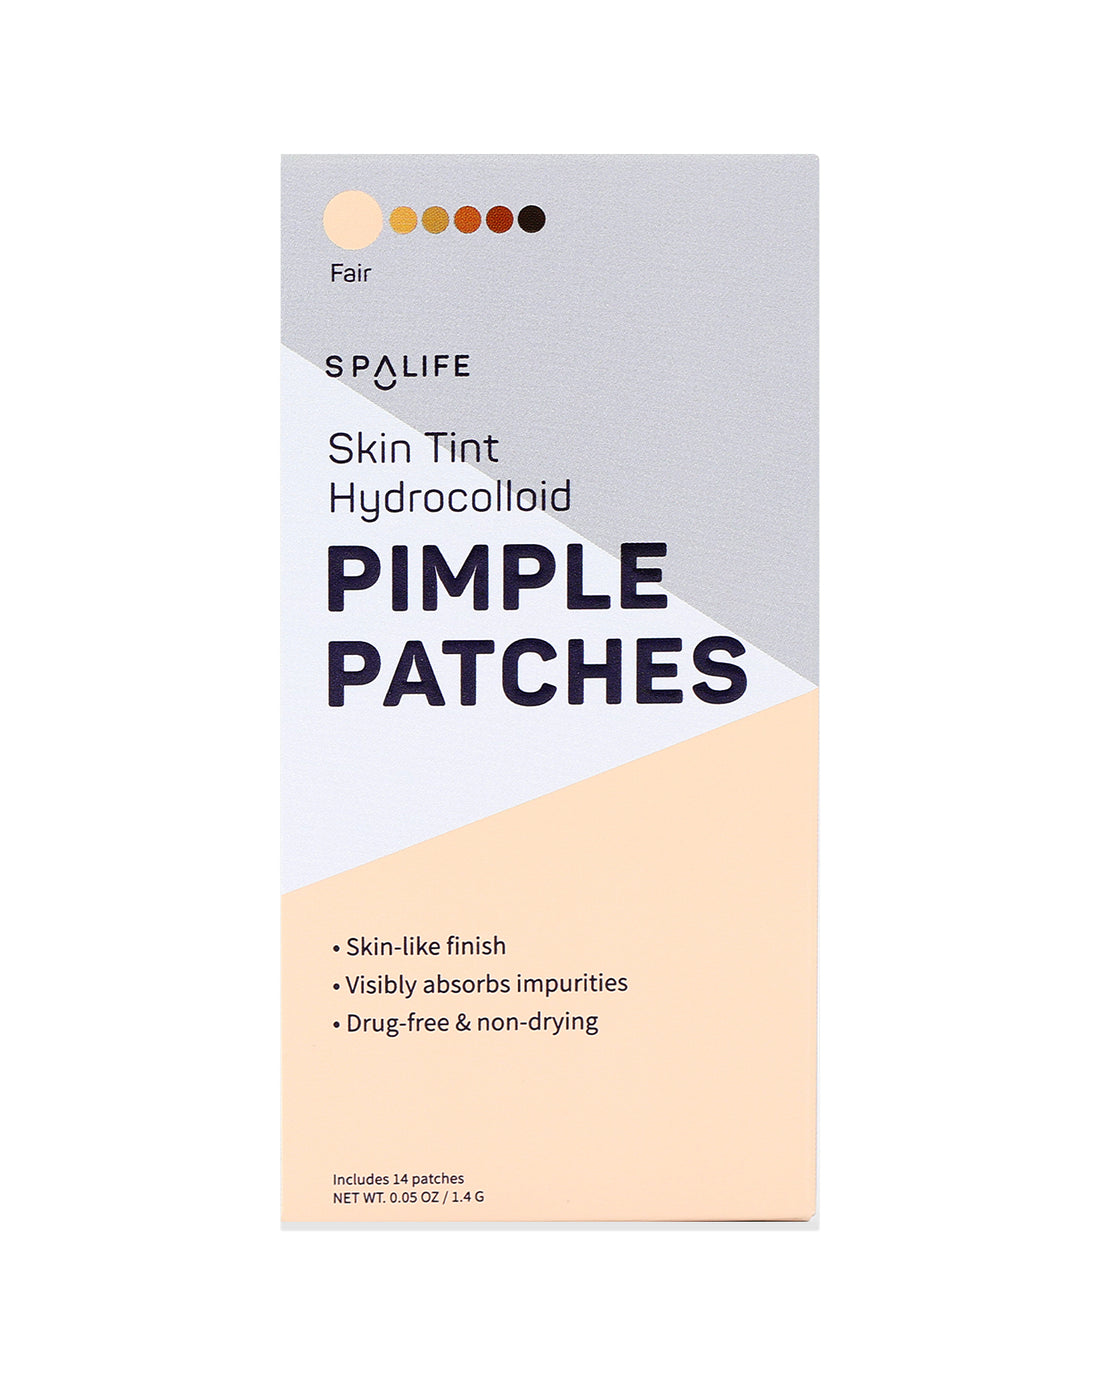 Skin_tint_pimple_patches_packe-767